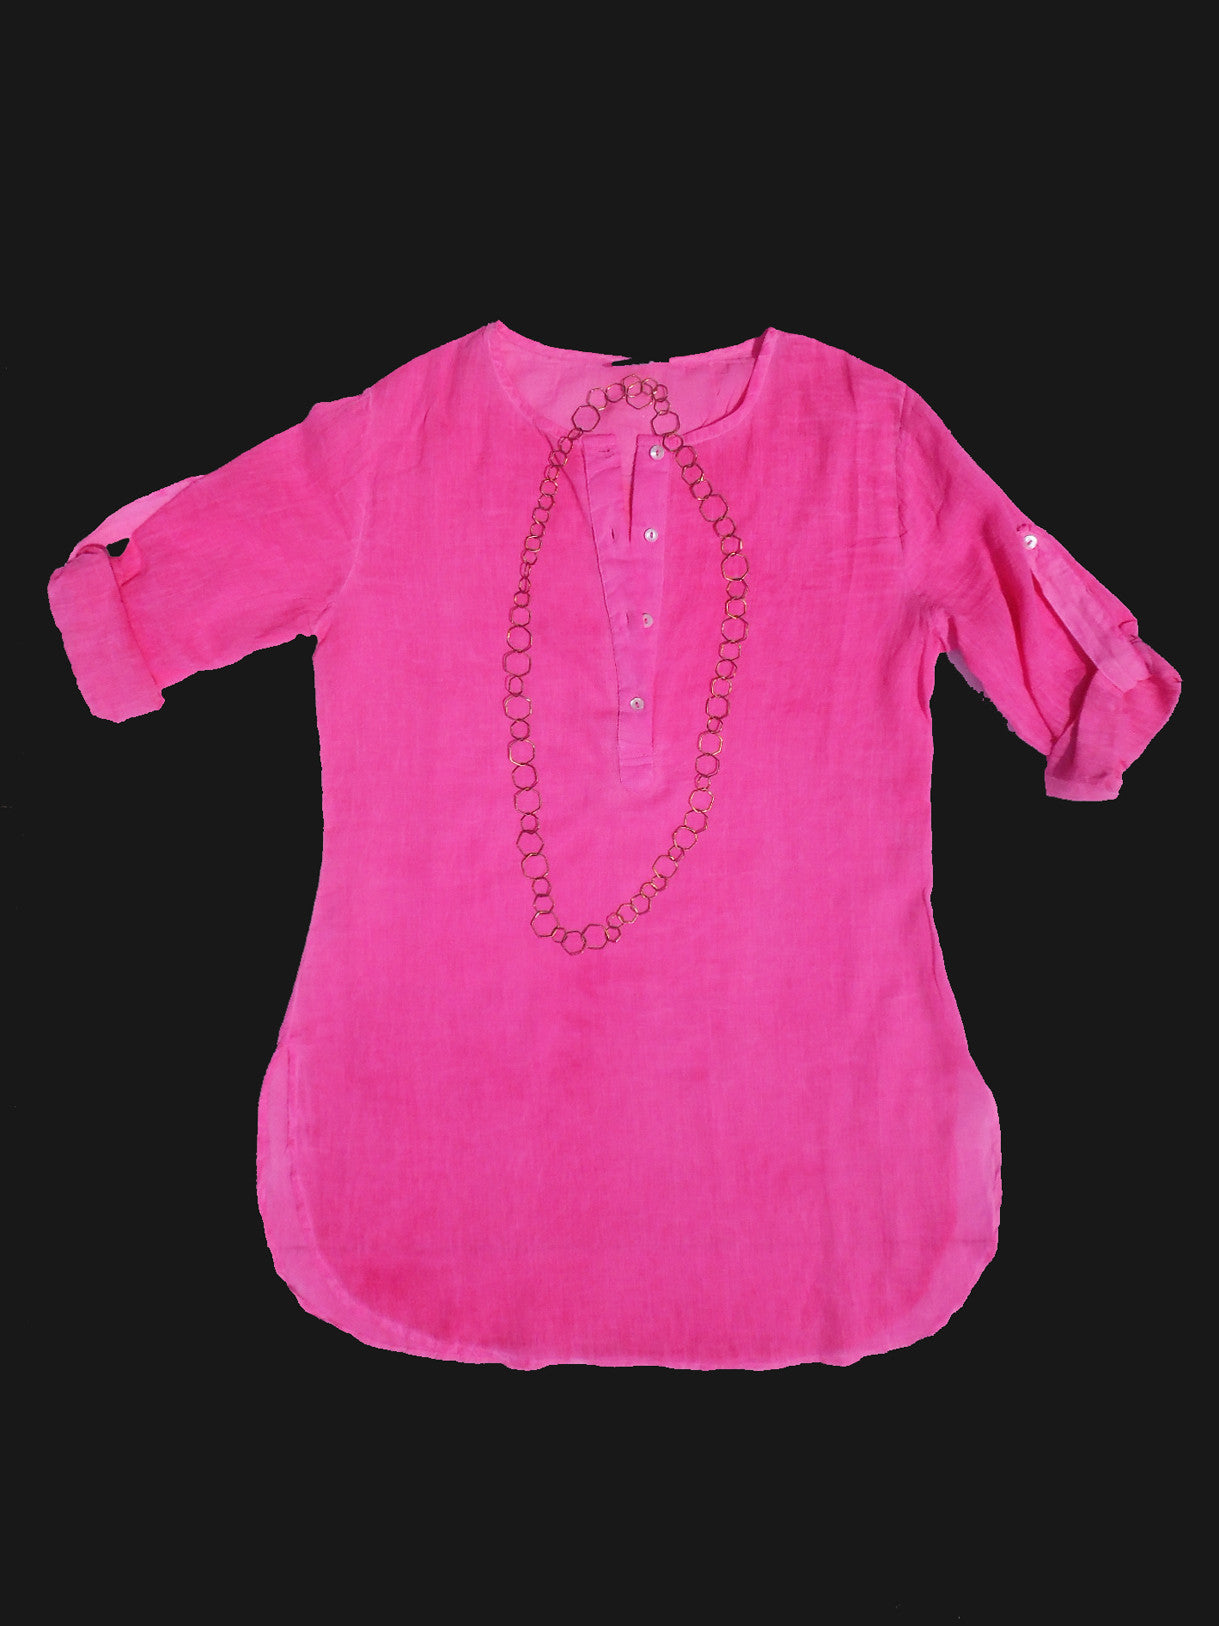 Batiste Cotton Beach Cover Up Top Hot Pink